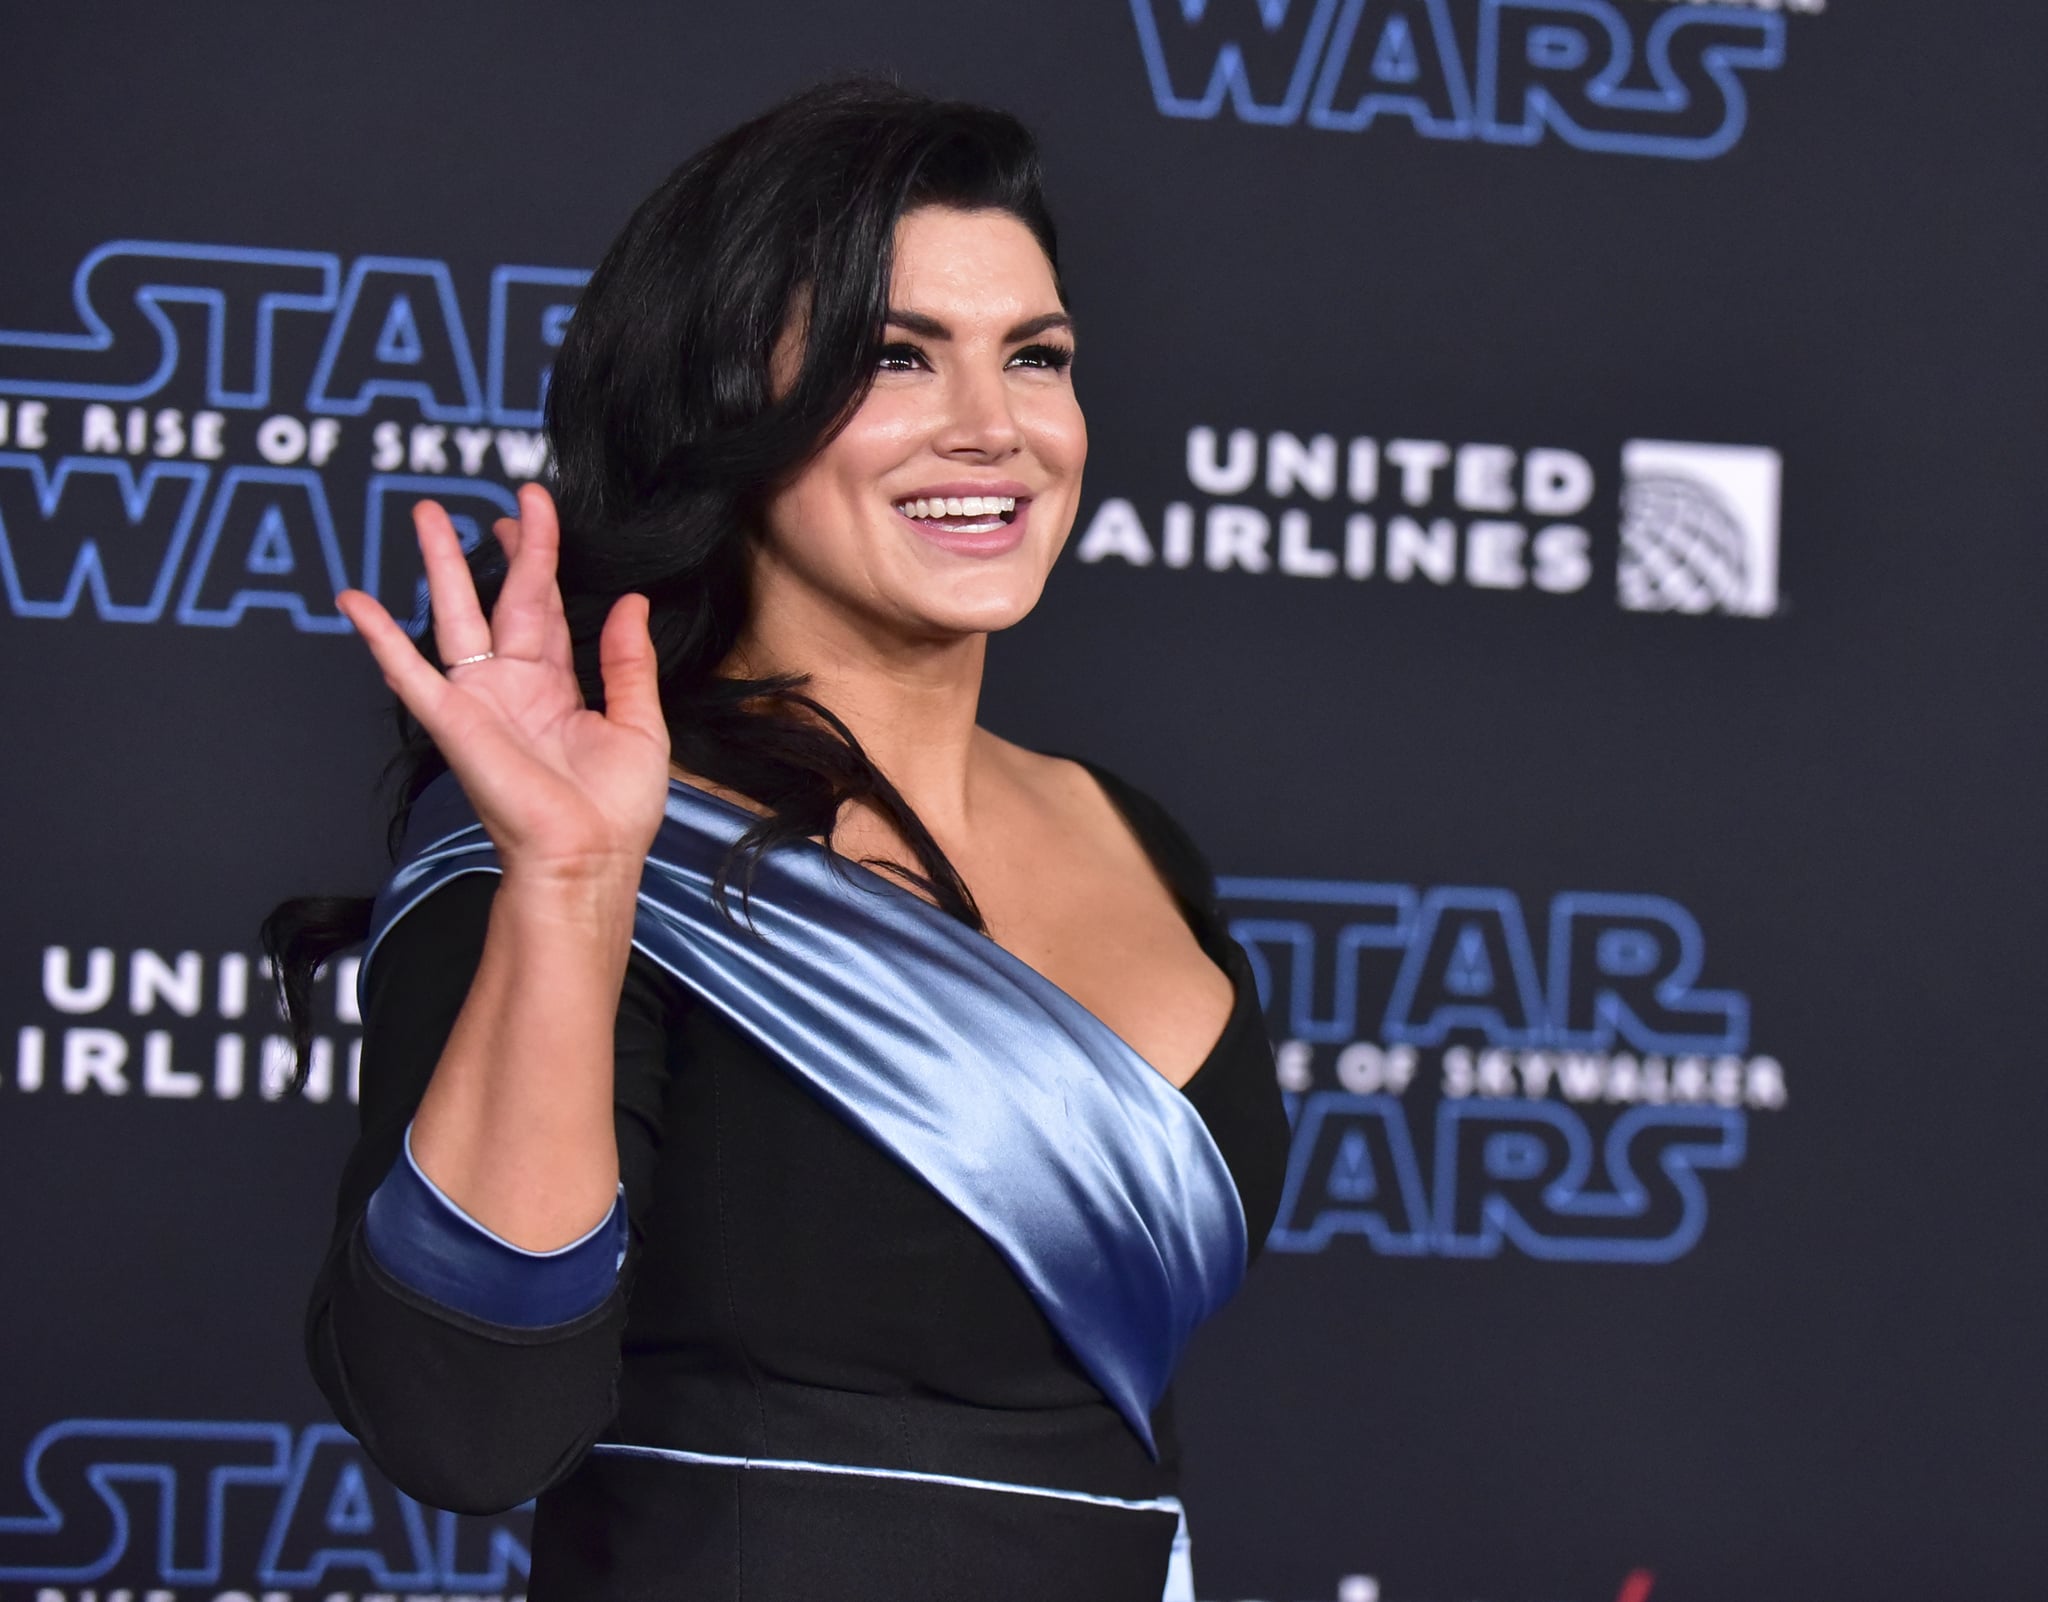 HOLLYWOOD, CALIFORNIA - DECEMBER 16: Gina Carano attends the Premiere of Disney's